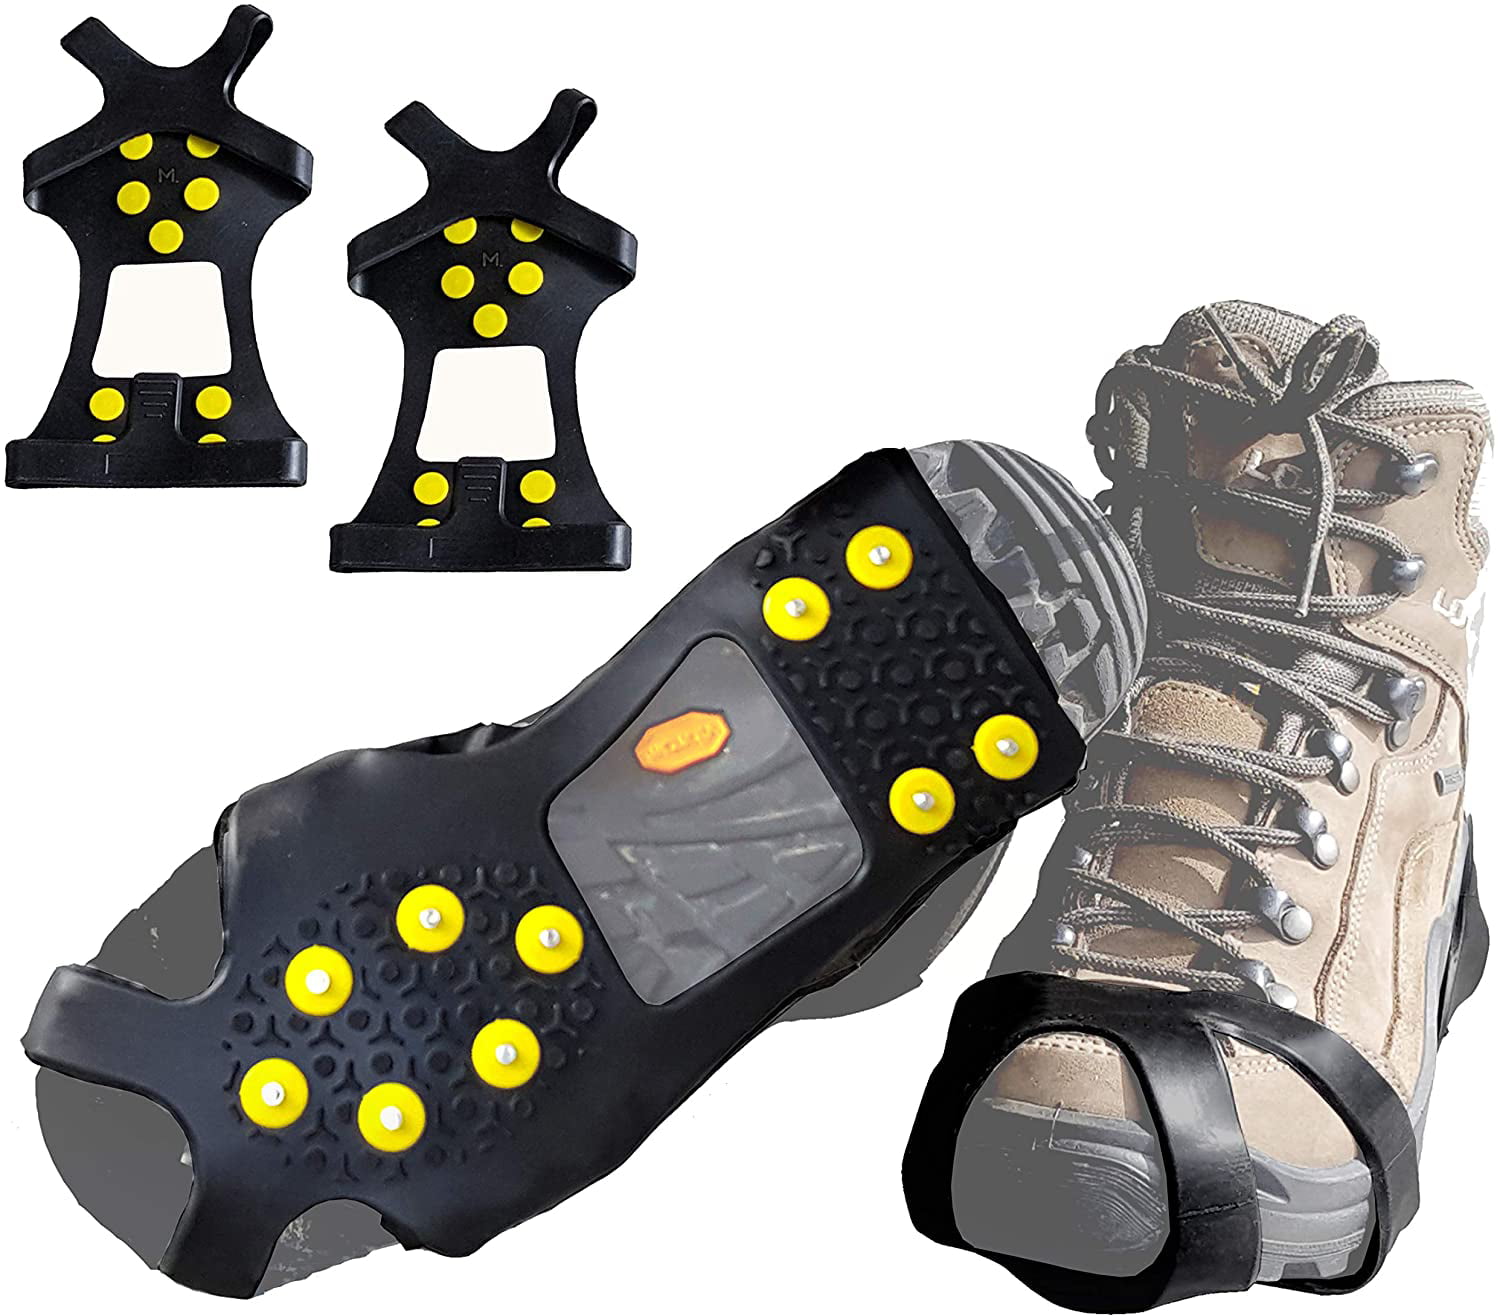 Crampon Traction Cleats Ice & Snow Grips Anti-Skid Traction Grips 7 Cleats SALE 